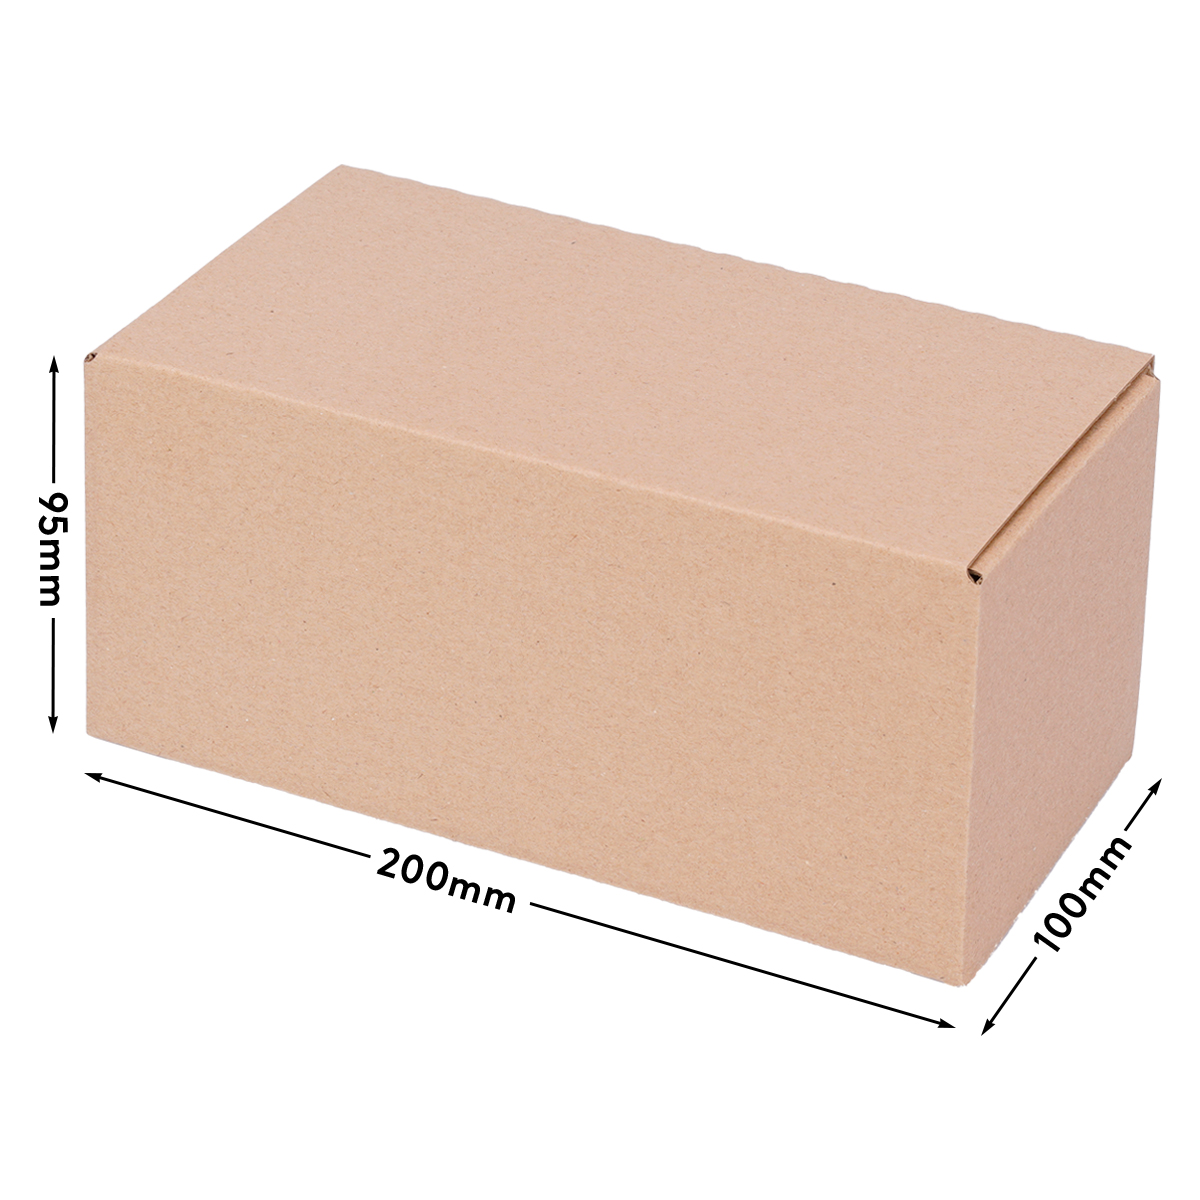 Automatic box 195x95x90 mm with self-adhesive lid - VP 20